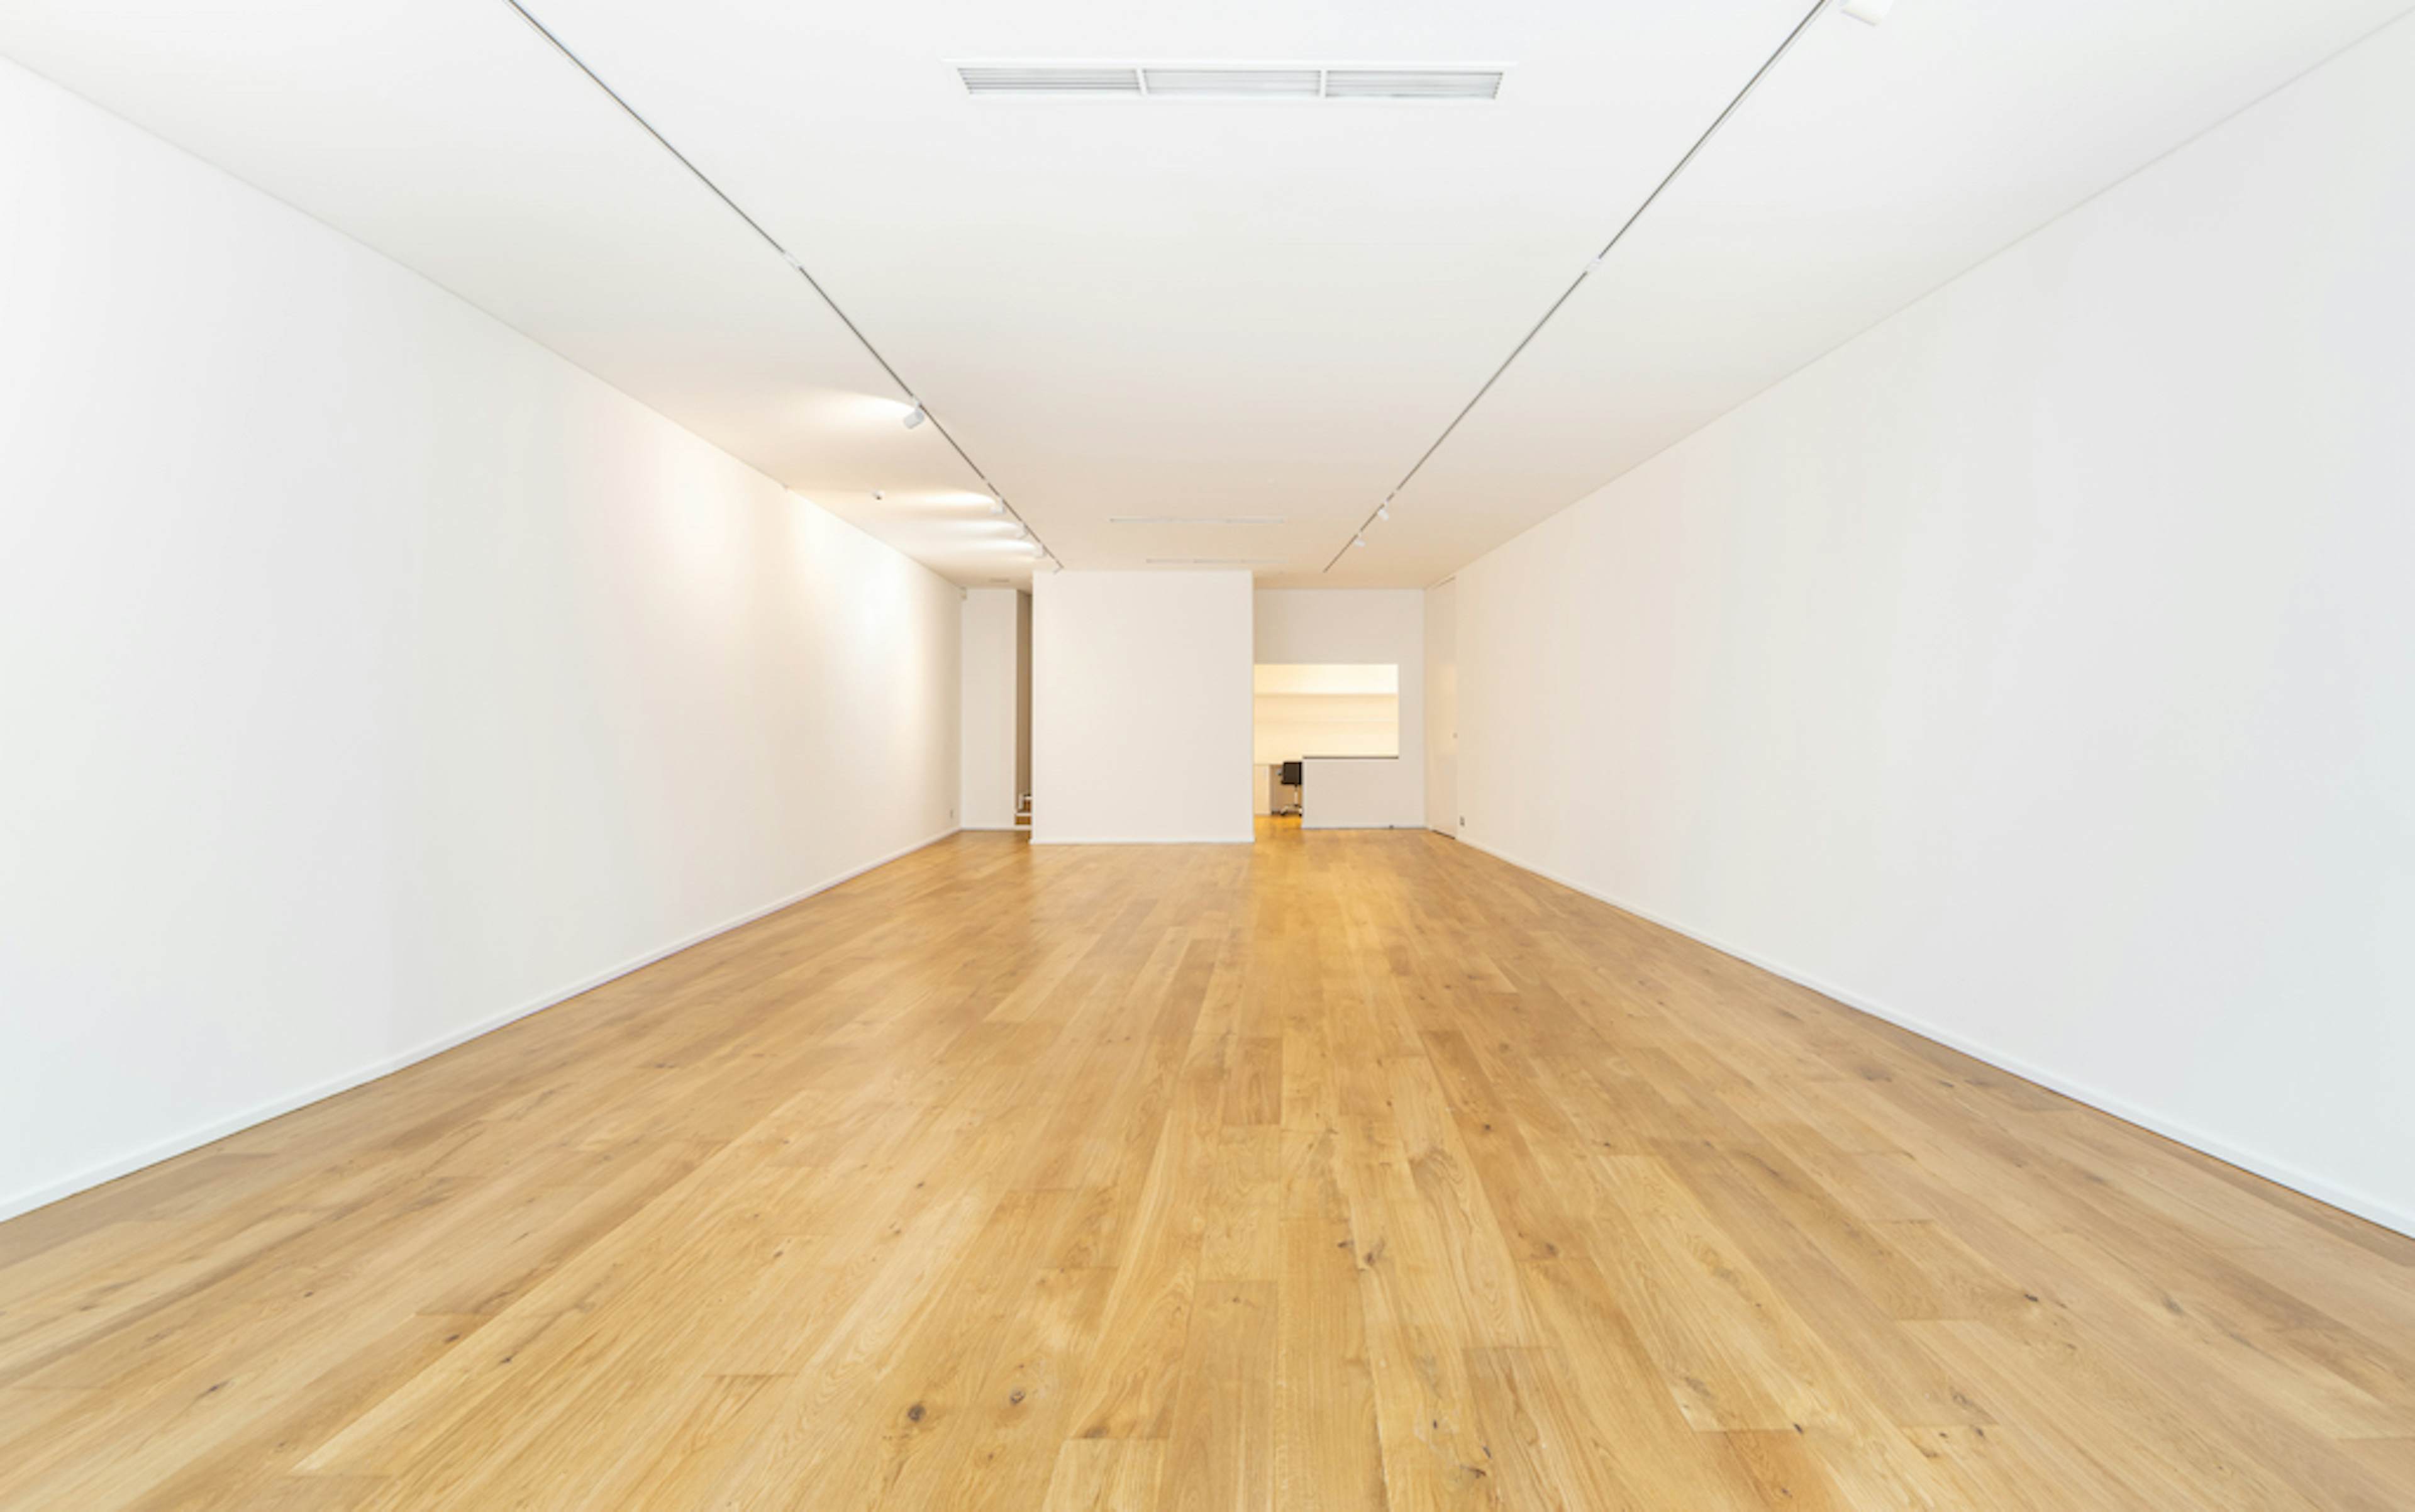 Mayfair Gallery - Whole Venue image 1